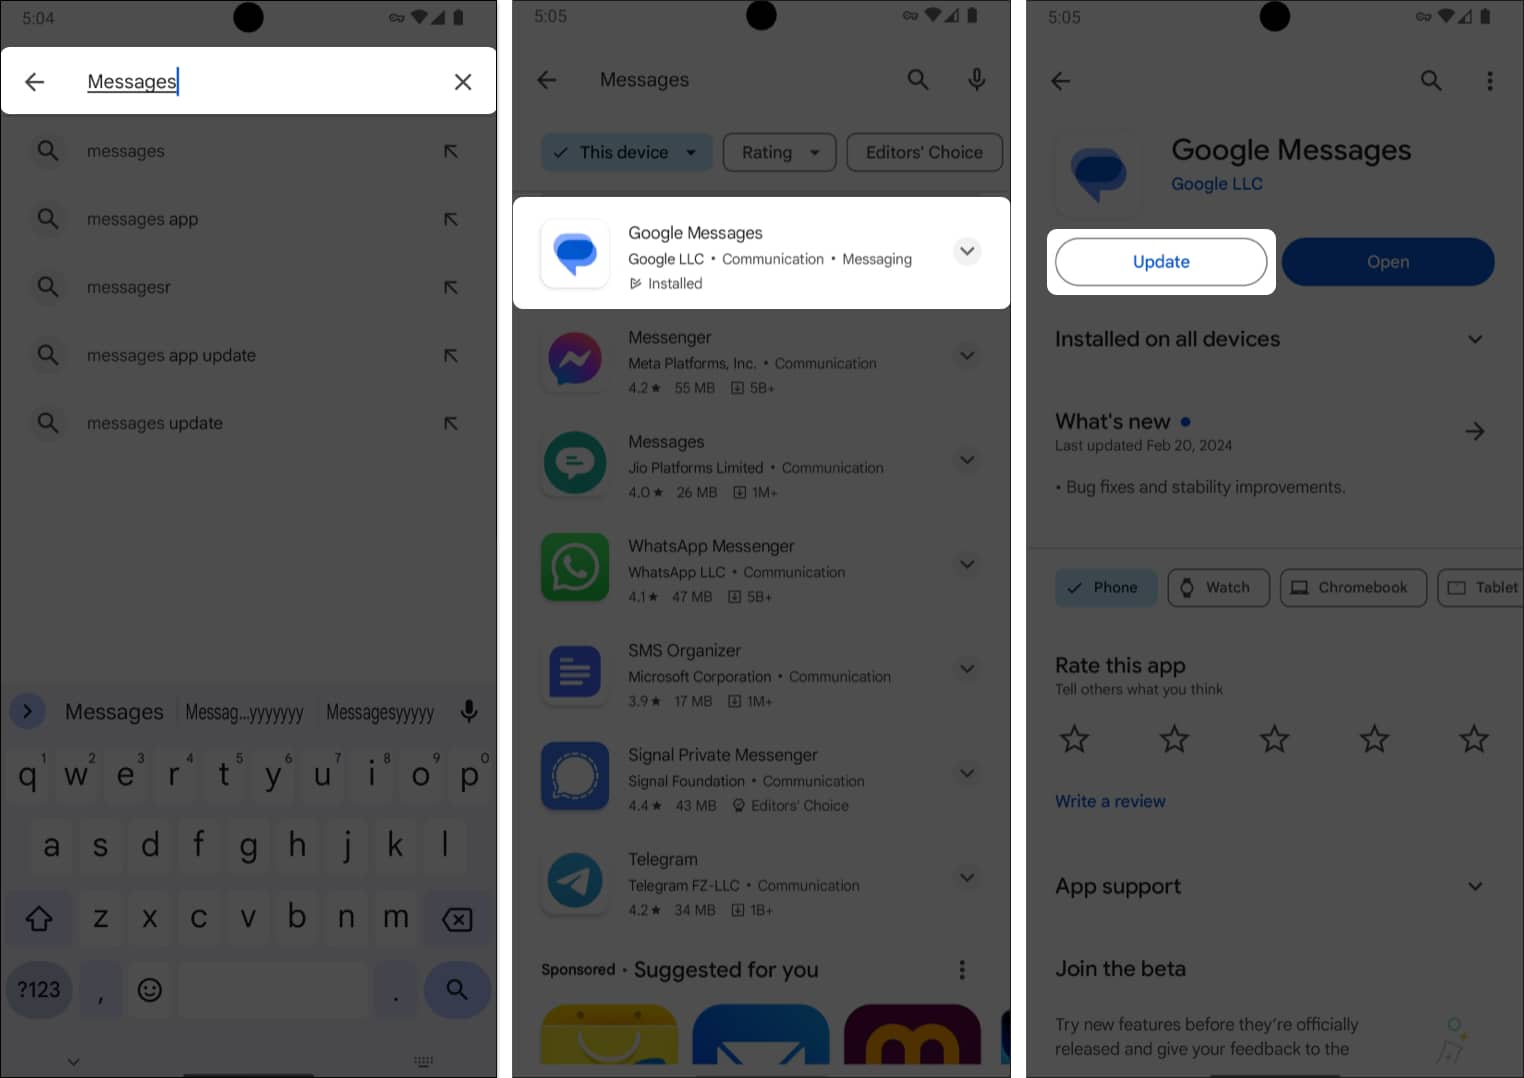 Search for the Messages app in Play store, tap on Message app and select Update